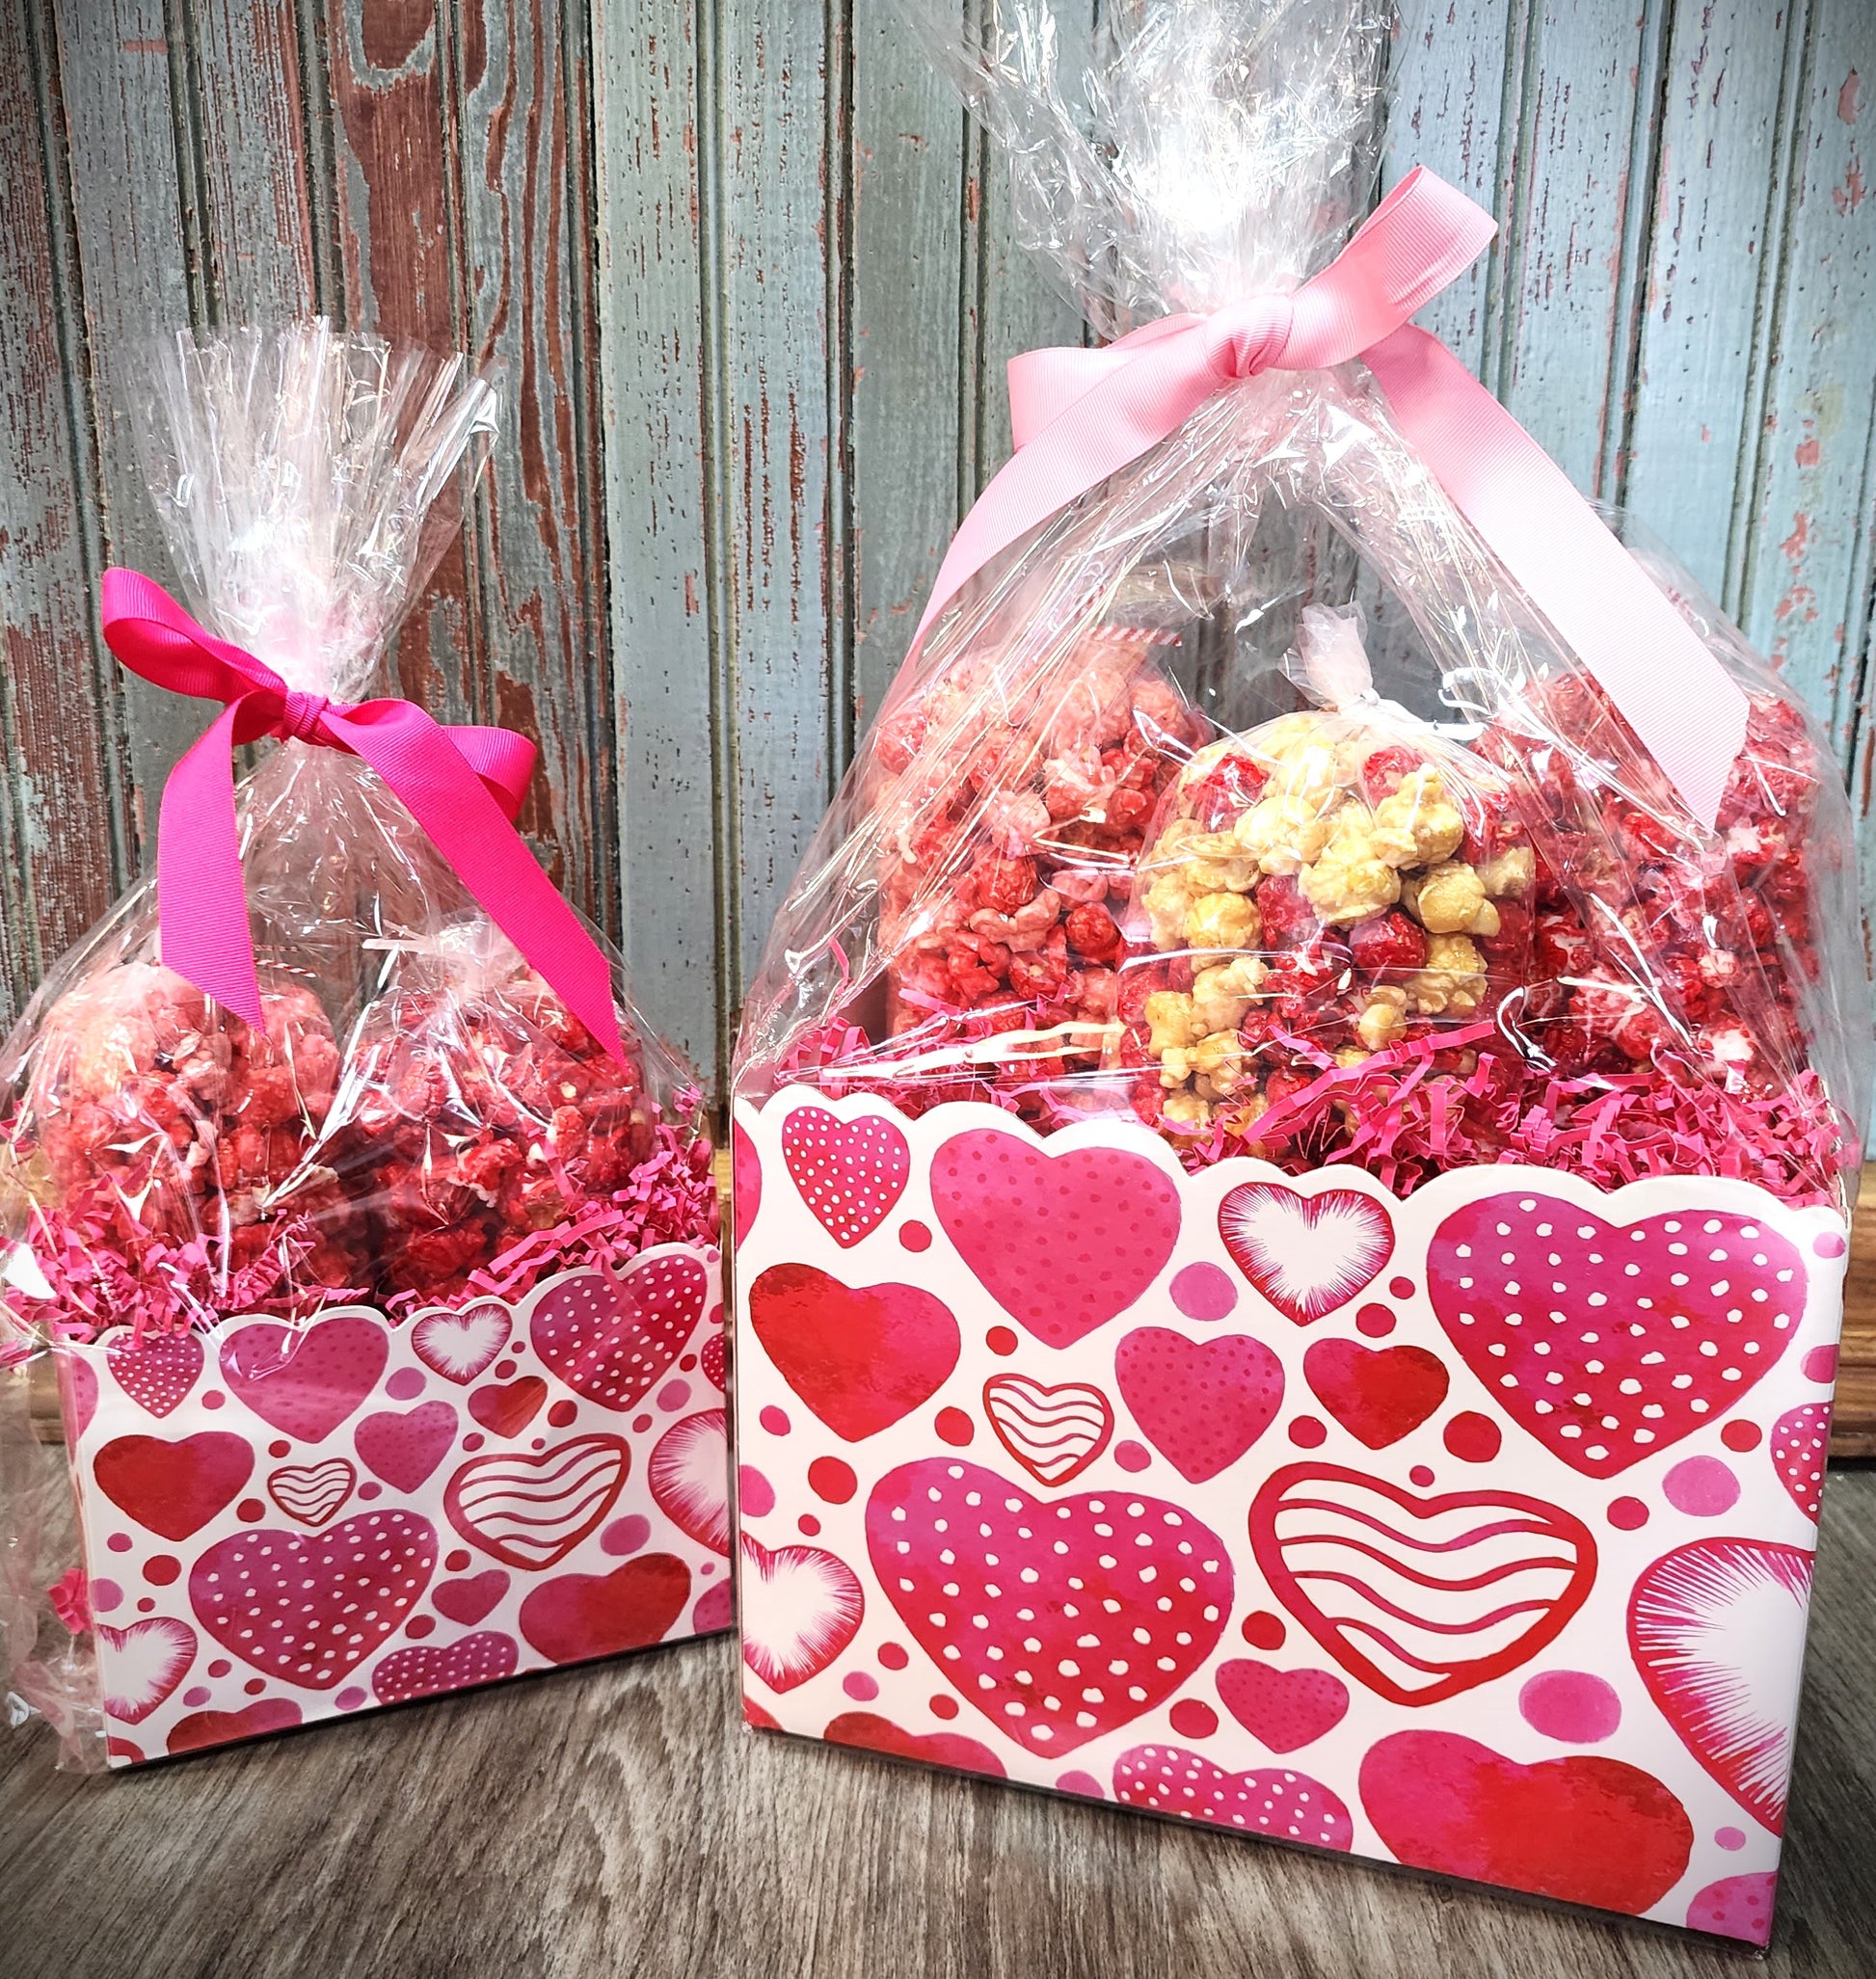 Sweethearts Popcorn Gift Boxes